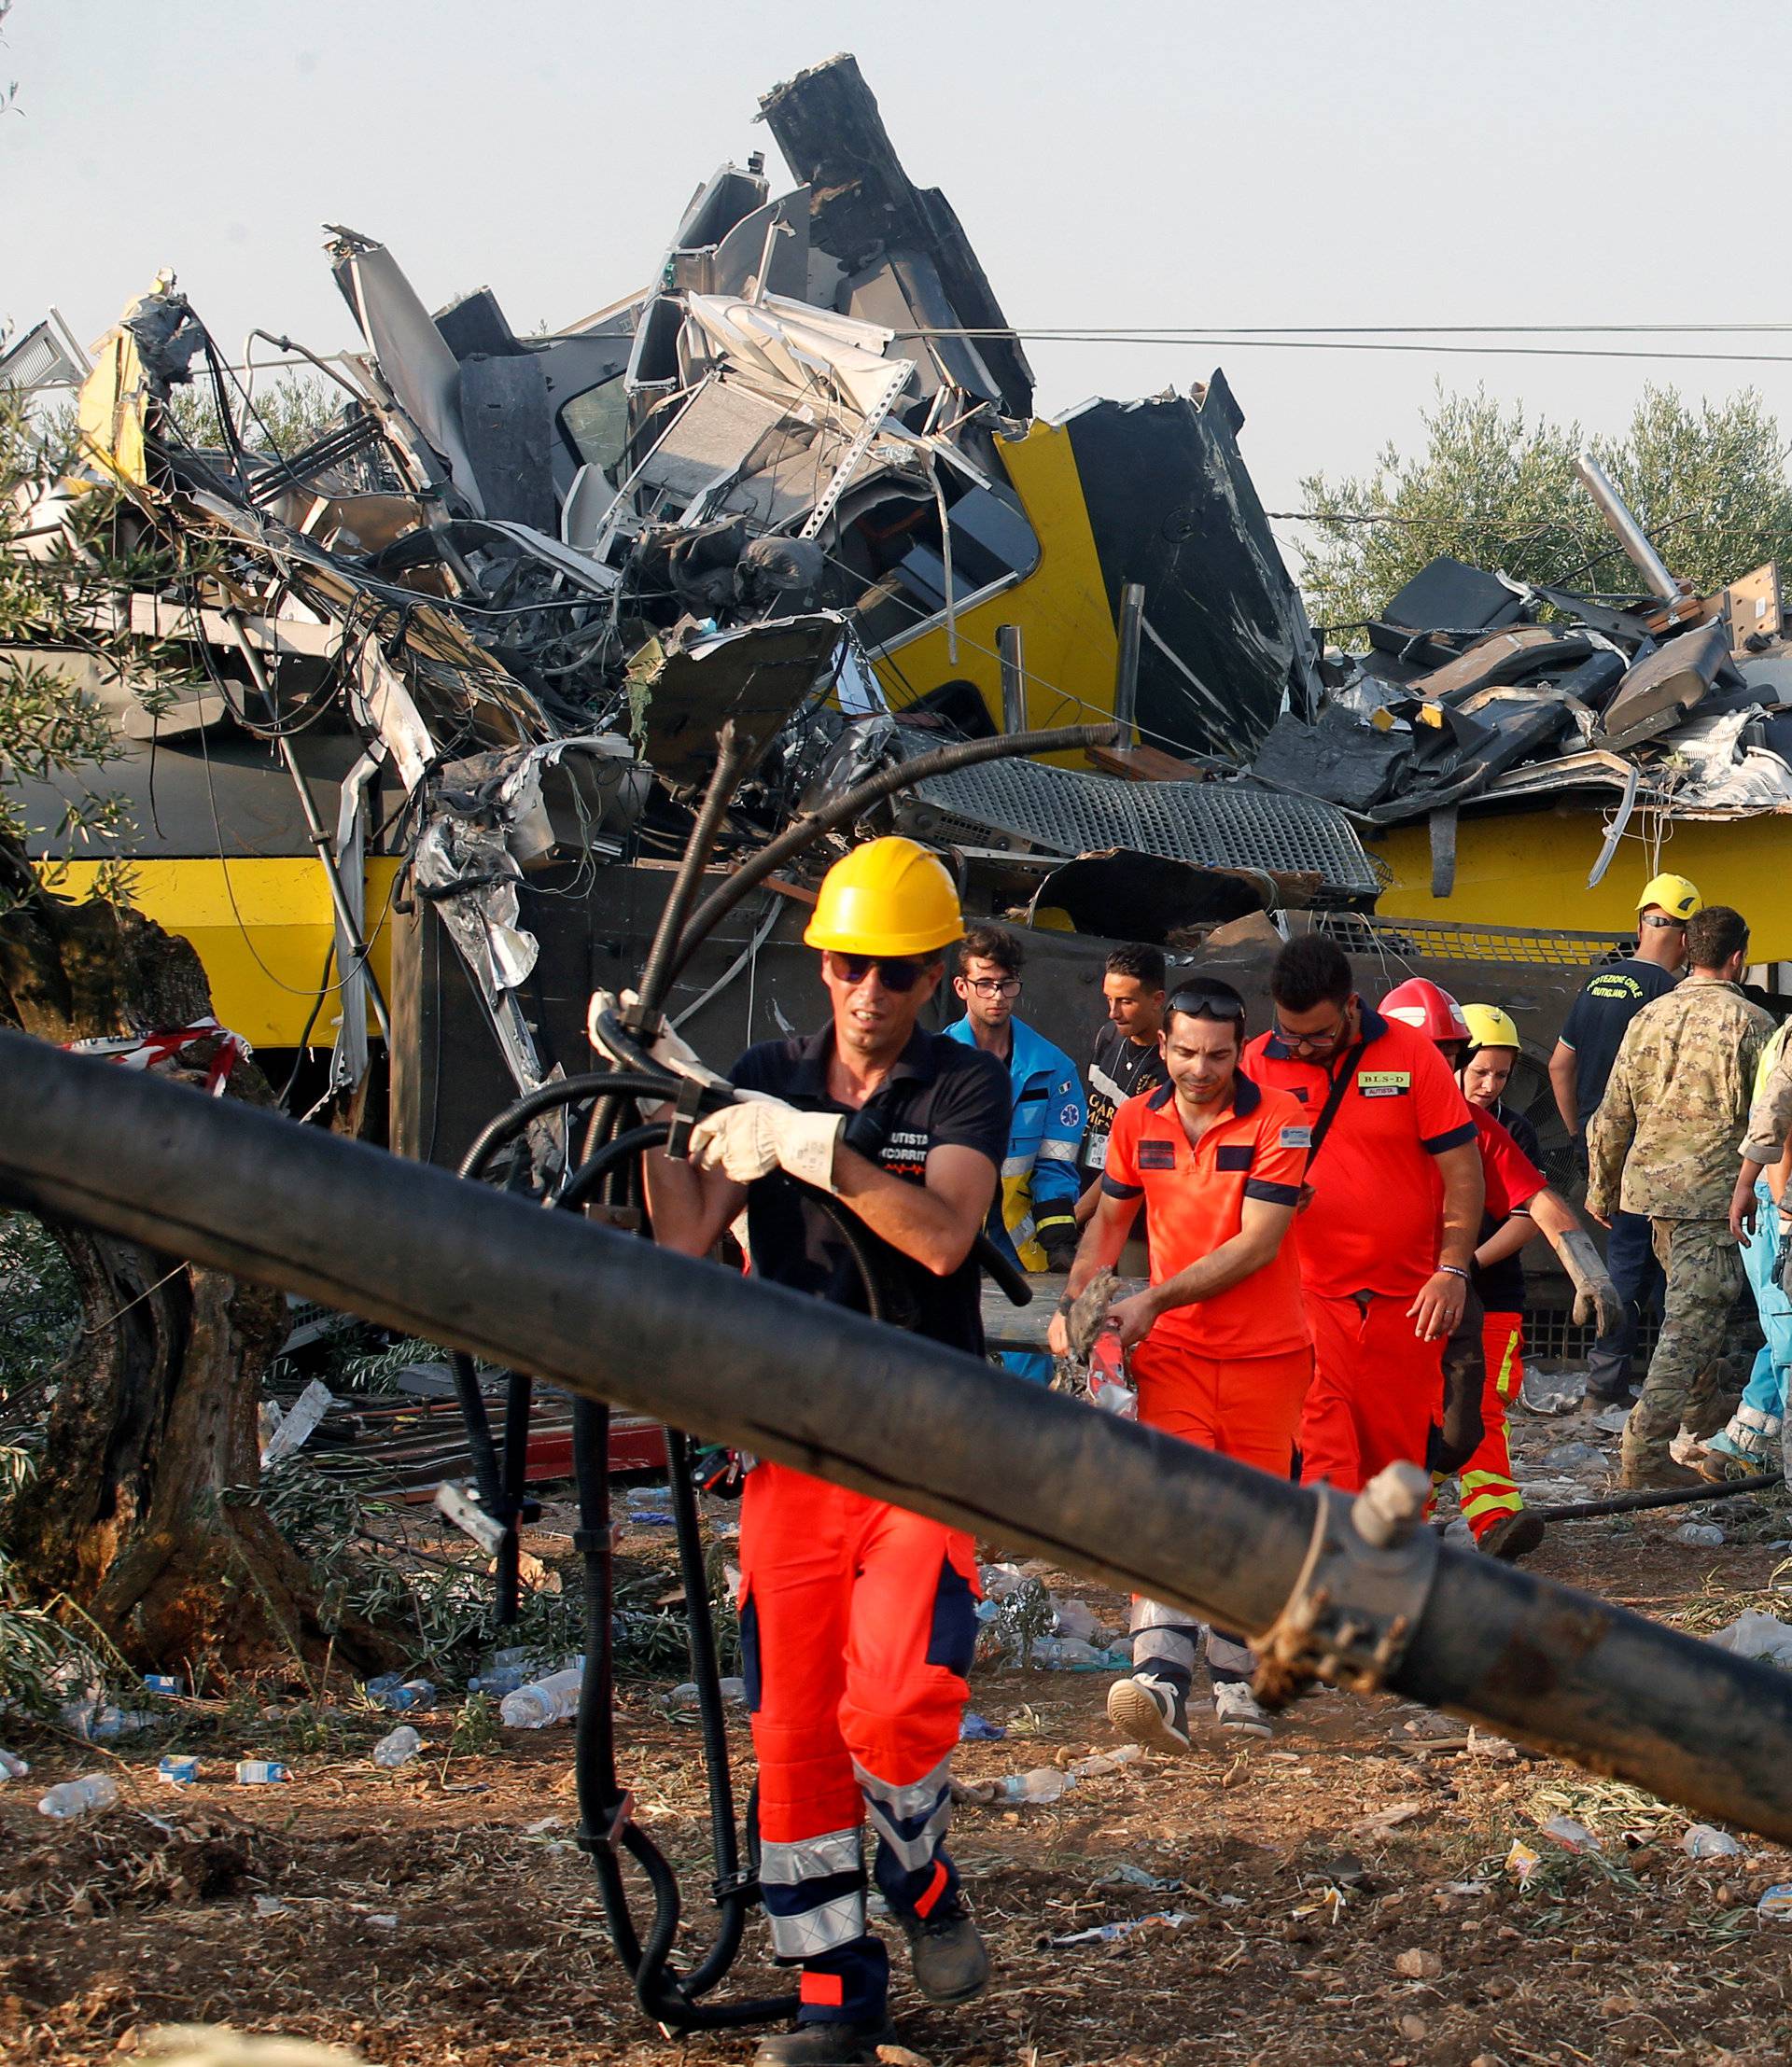 Rescuers work at the site where two passenger trains collided in the middle of an olive grove in the southern village of Corato